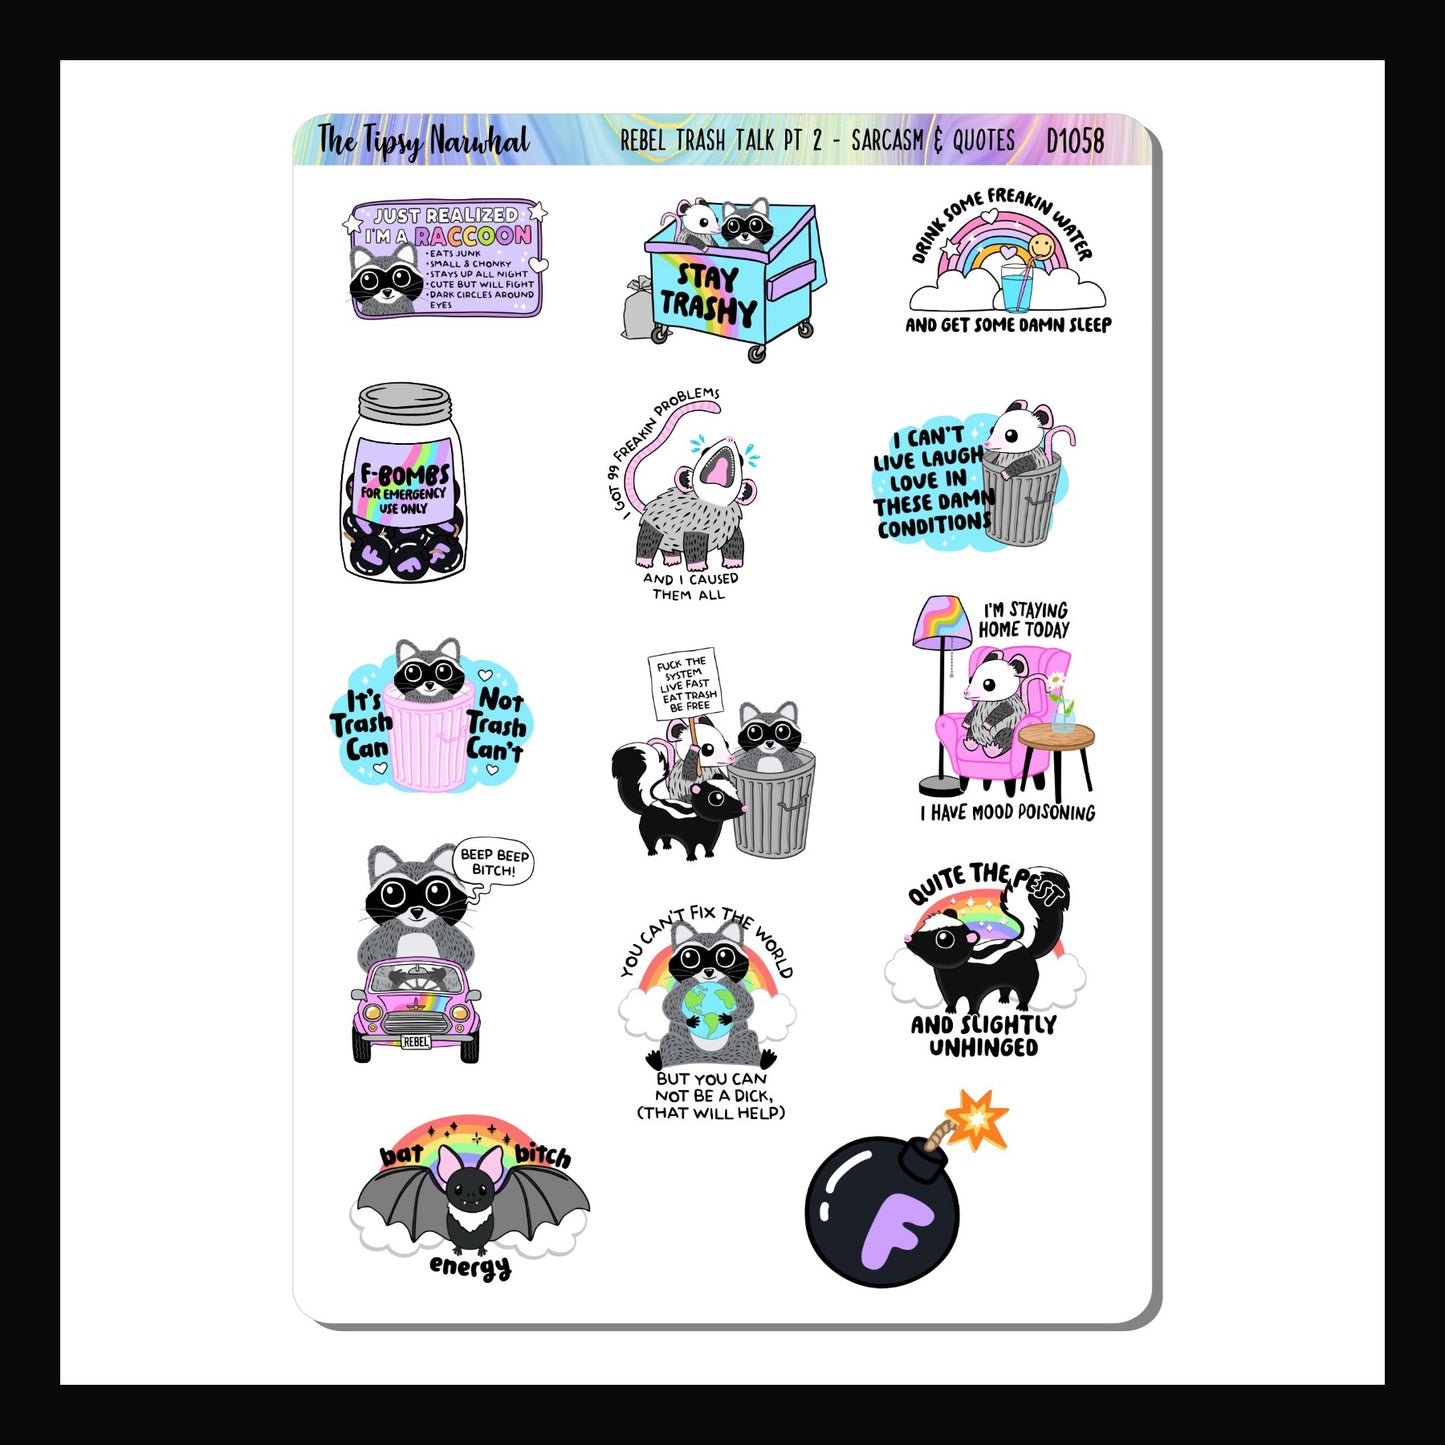 Digital Rebel Trash Talk Pt 2 Decor Sheet is a digital/printable version of the sheet with the same name.  It features 14 colorful stickers each with a unique snarky quote.  Several stickers also feature cute animals and rainbows.  Sticker size varies by design.